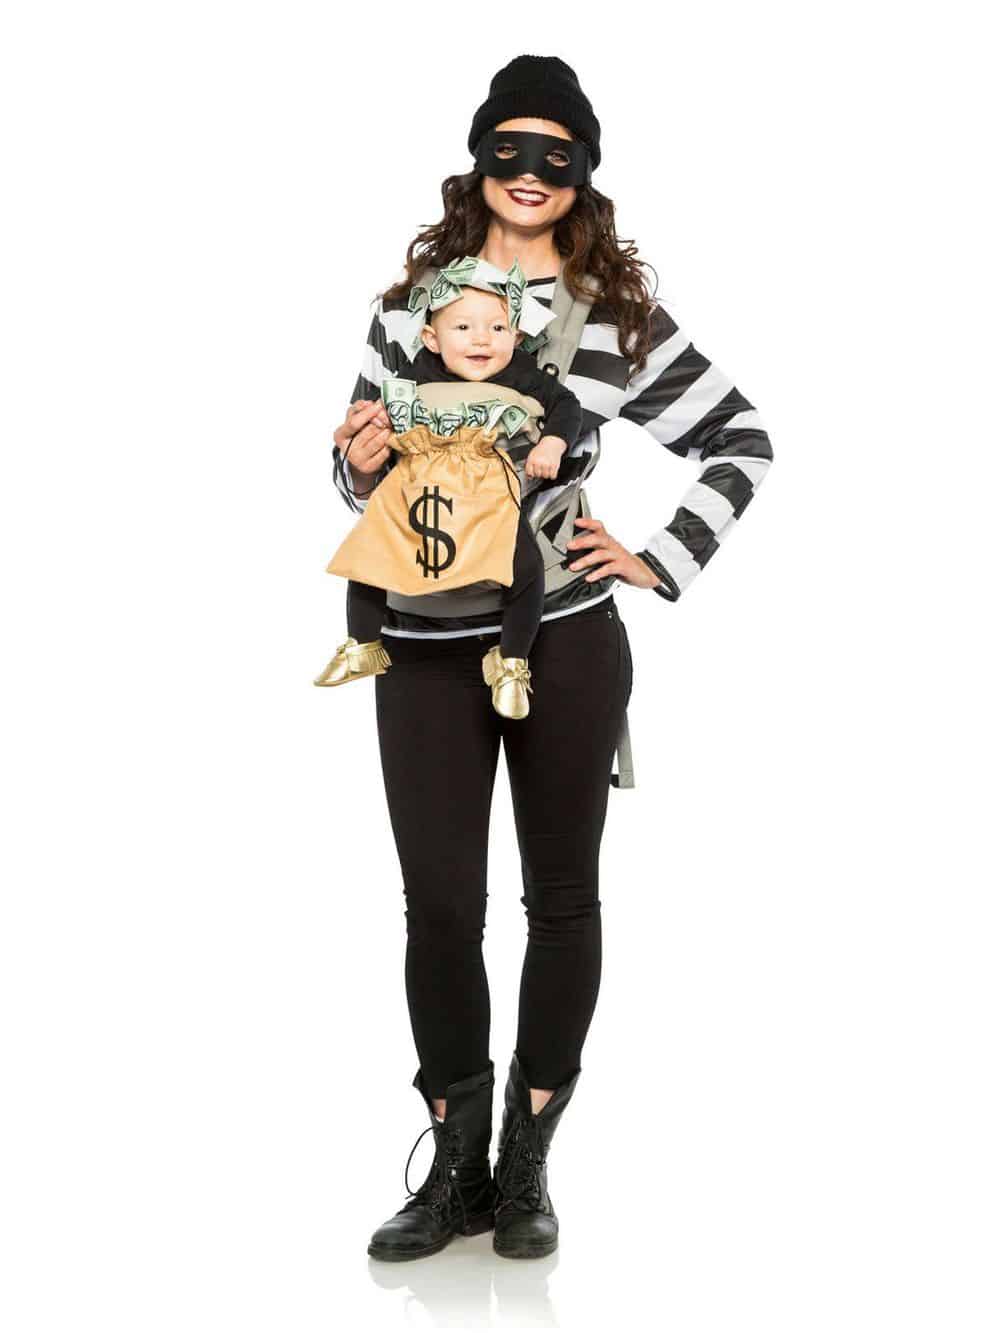 Product Image of the Robber and Money Bag Parent and Baby Costume